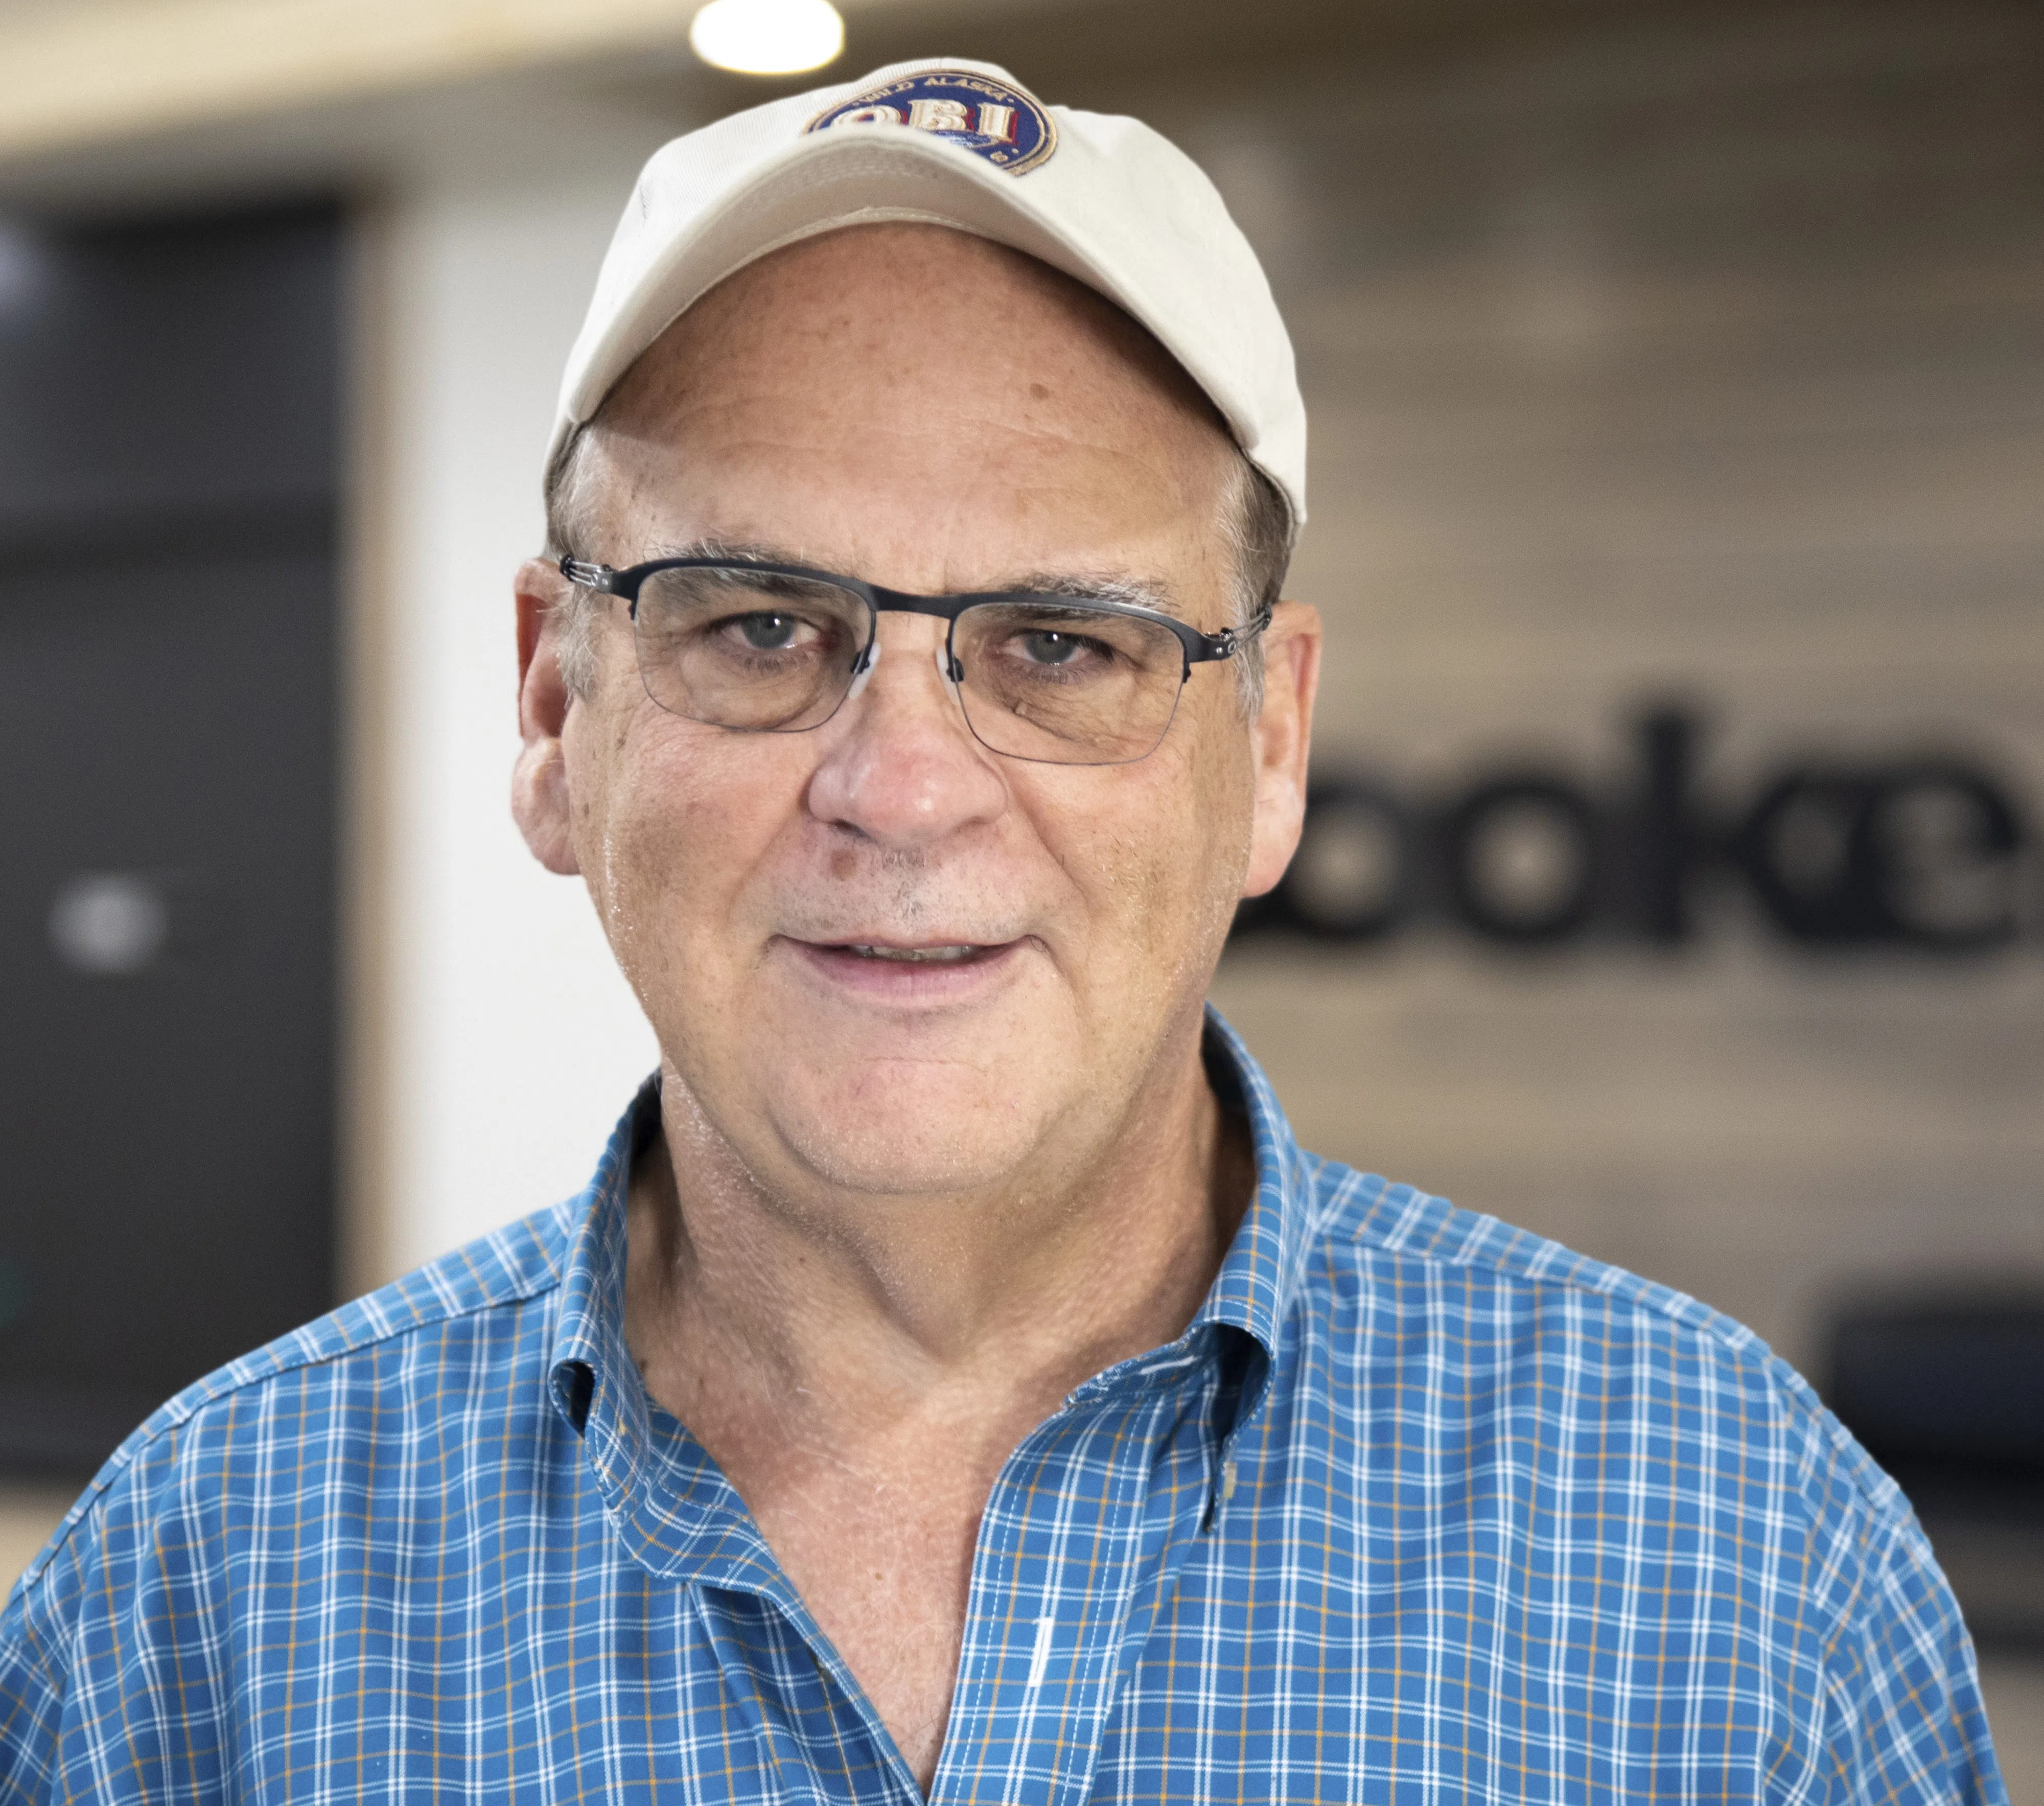 Podcast: Glenn Cooke discusses how Cooke Inc. has quietly become the largest privately owned seafood company in the world